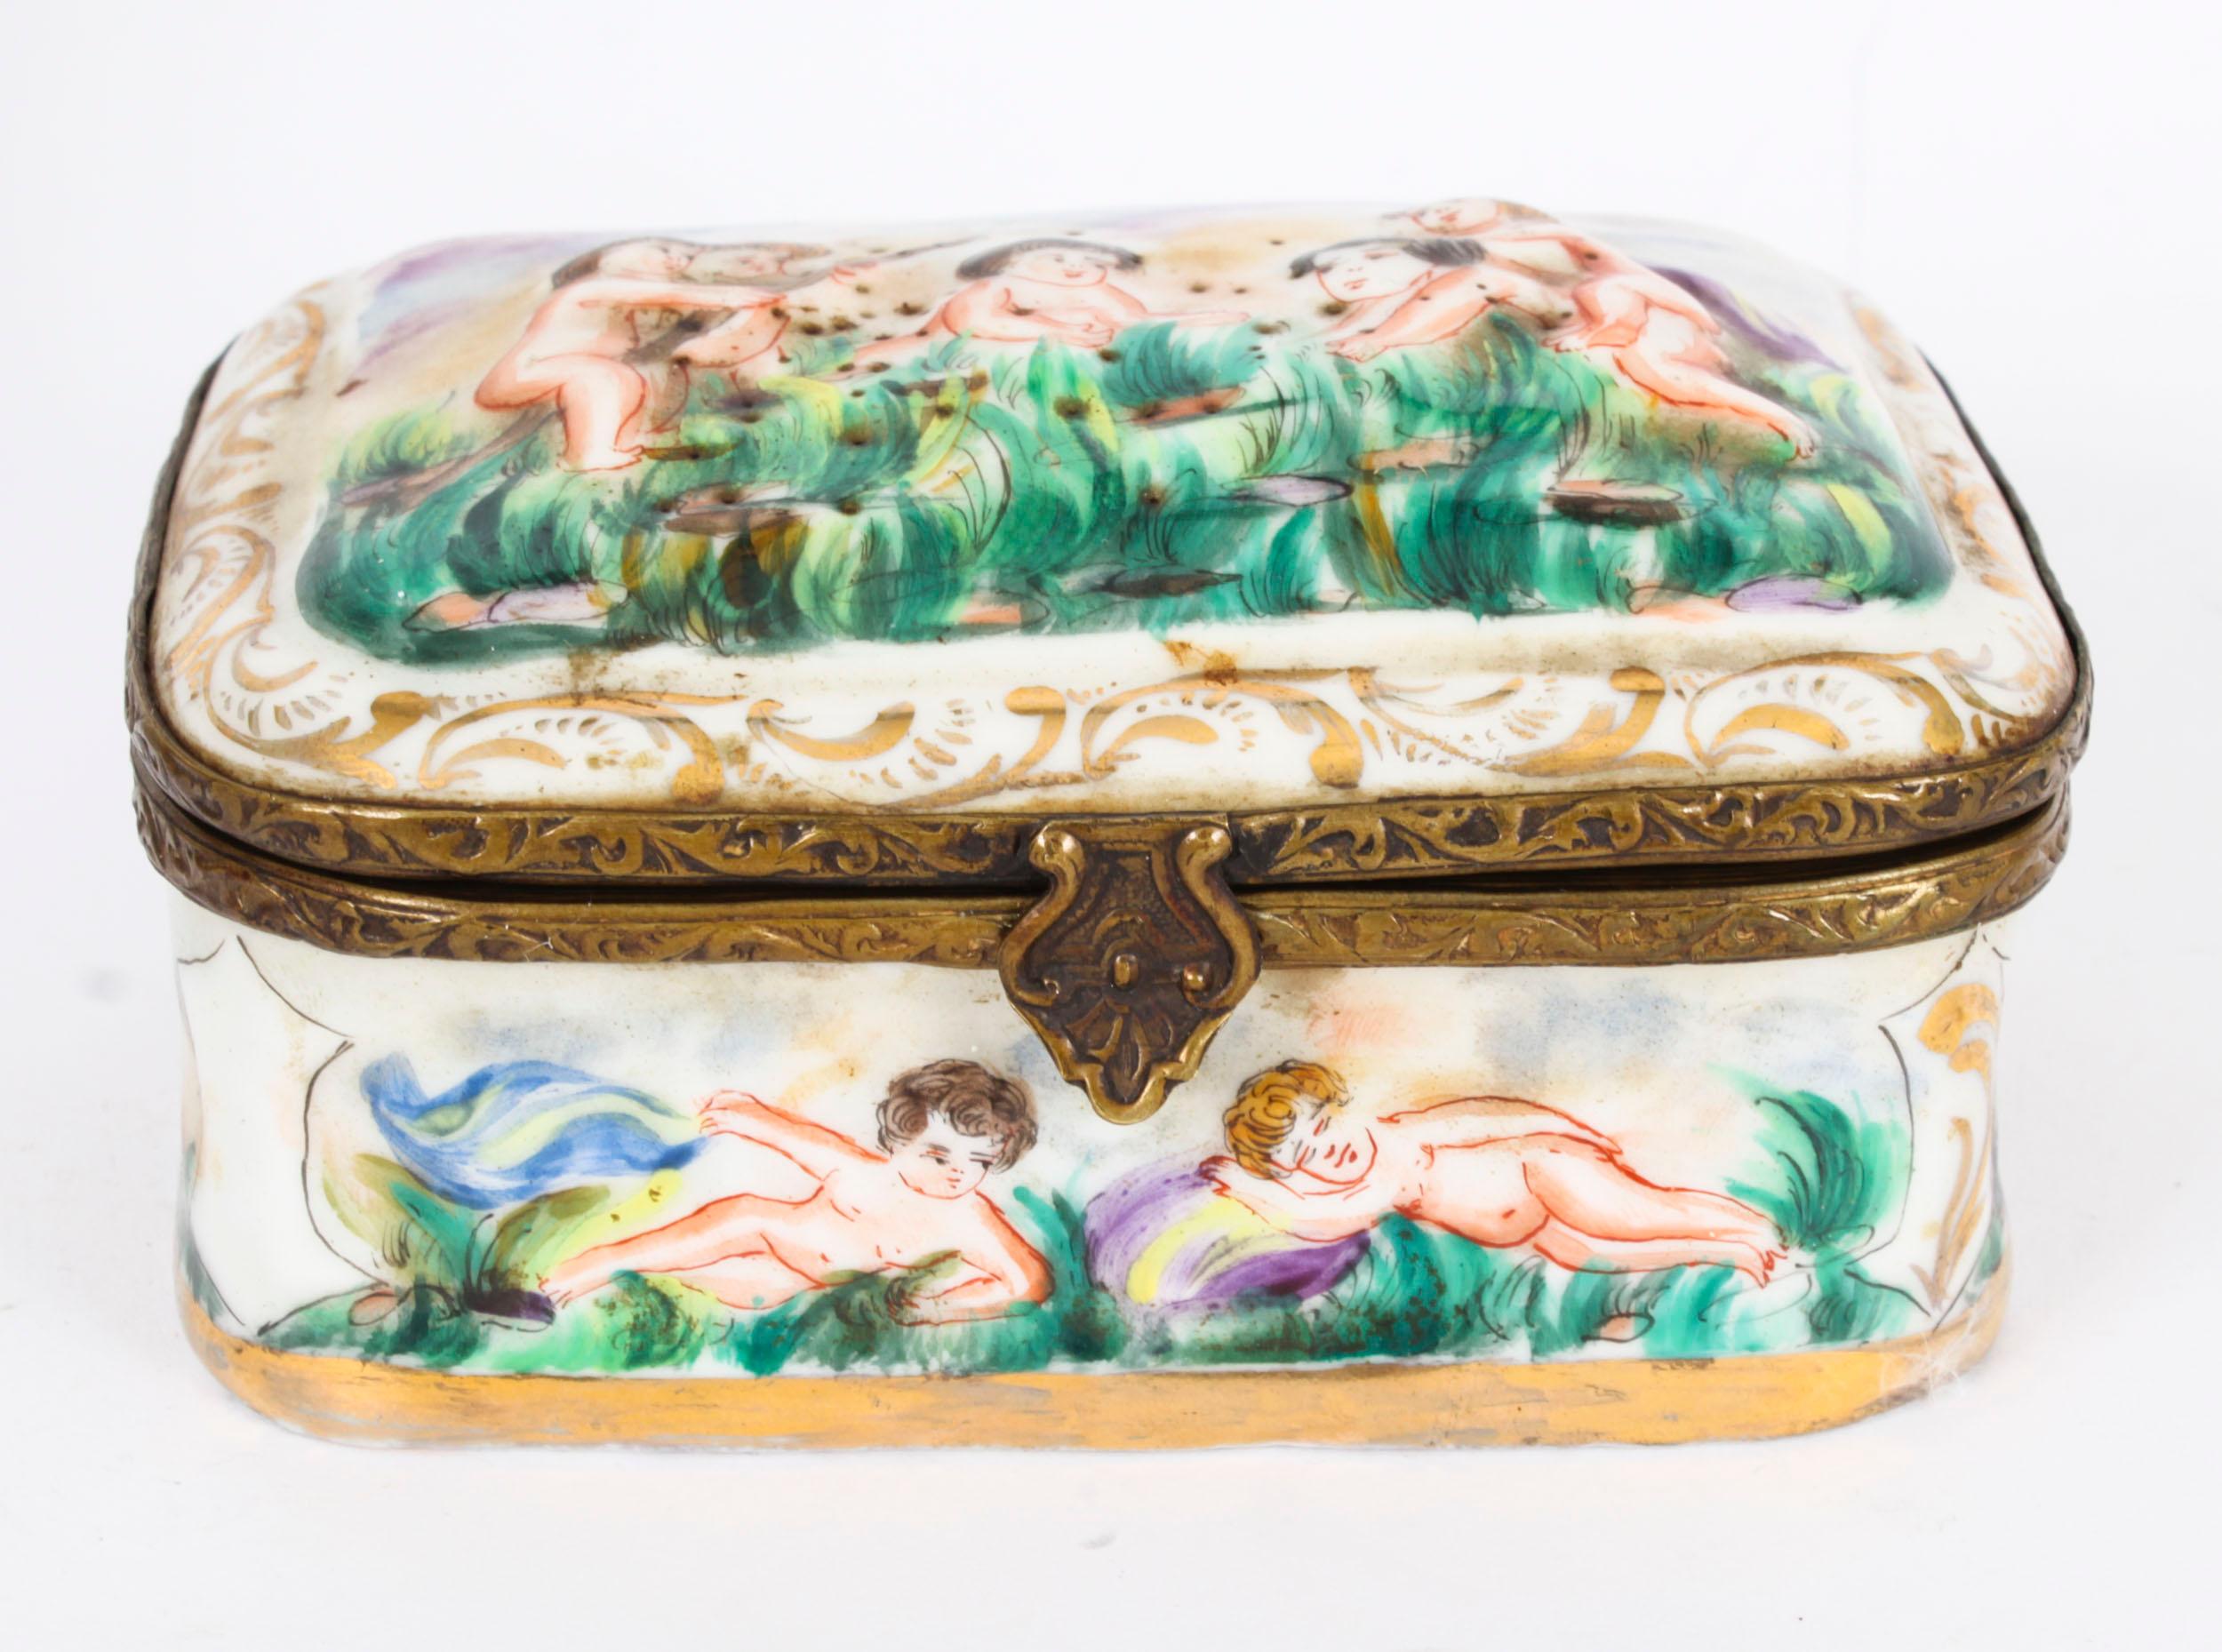 This is a beautiful antique Italian Capodimonte porcelain  casket, late 19th Century in date.

The box and cover are superbly decorated in relief with classical scenes, and there are decorative ormolu mounts to the lid and base. The interior is